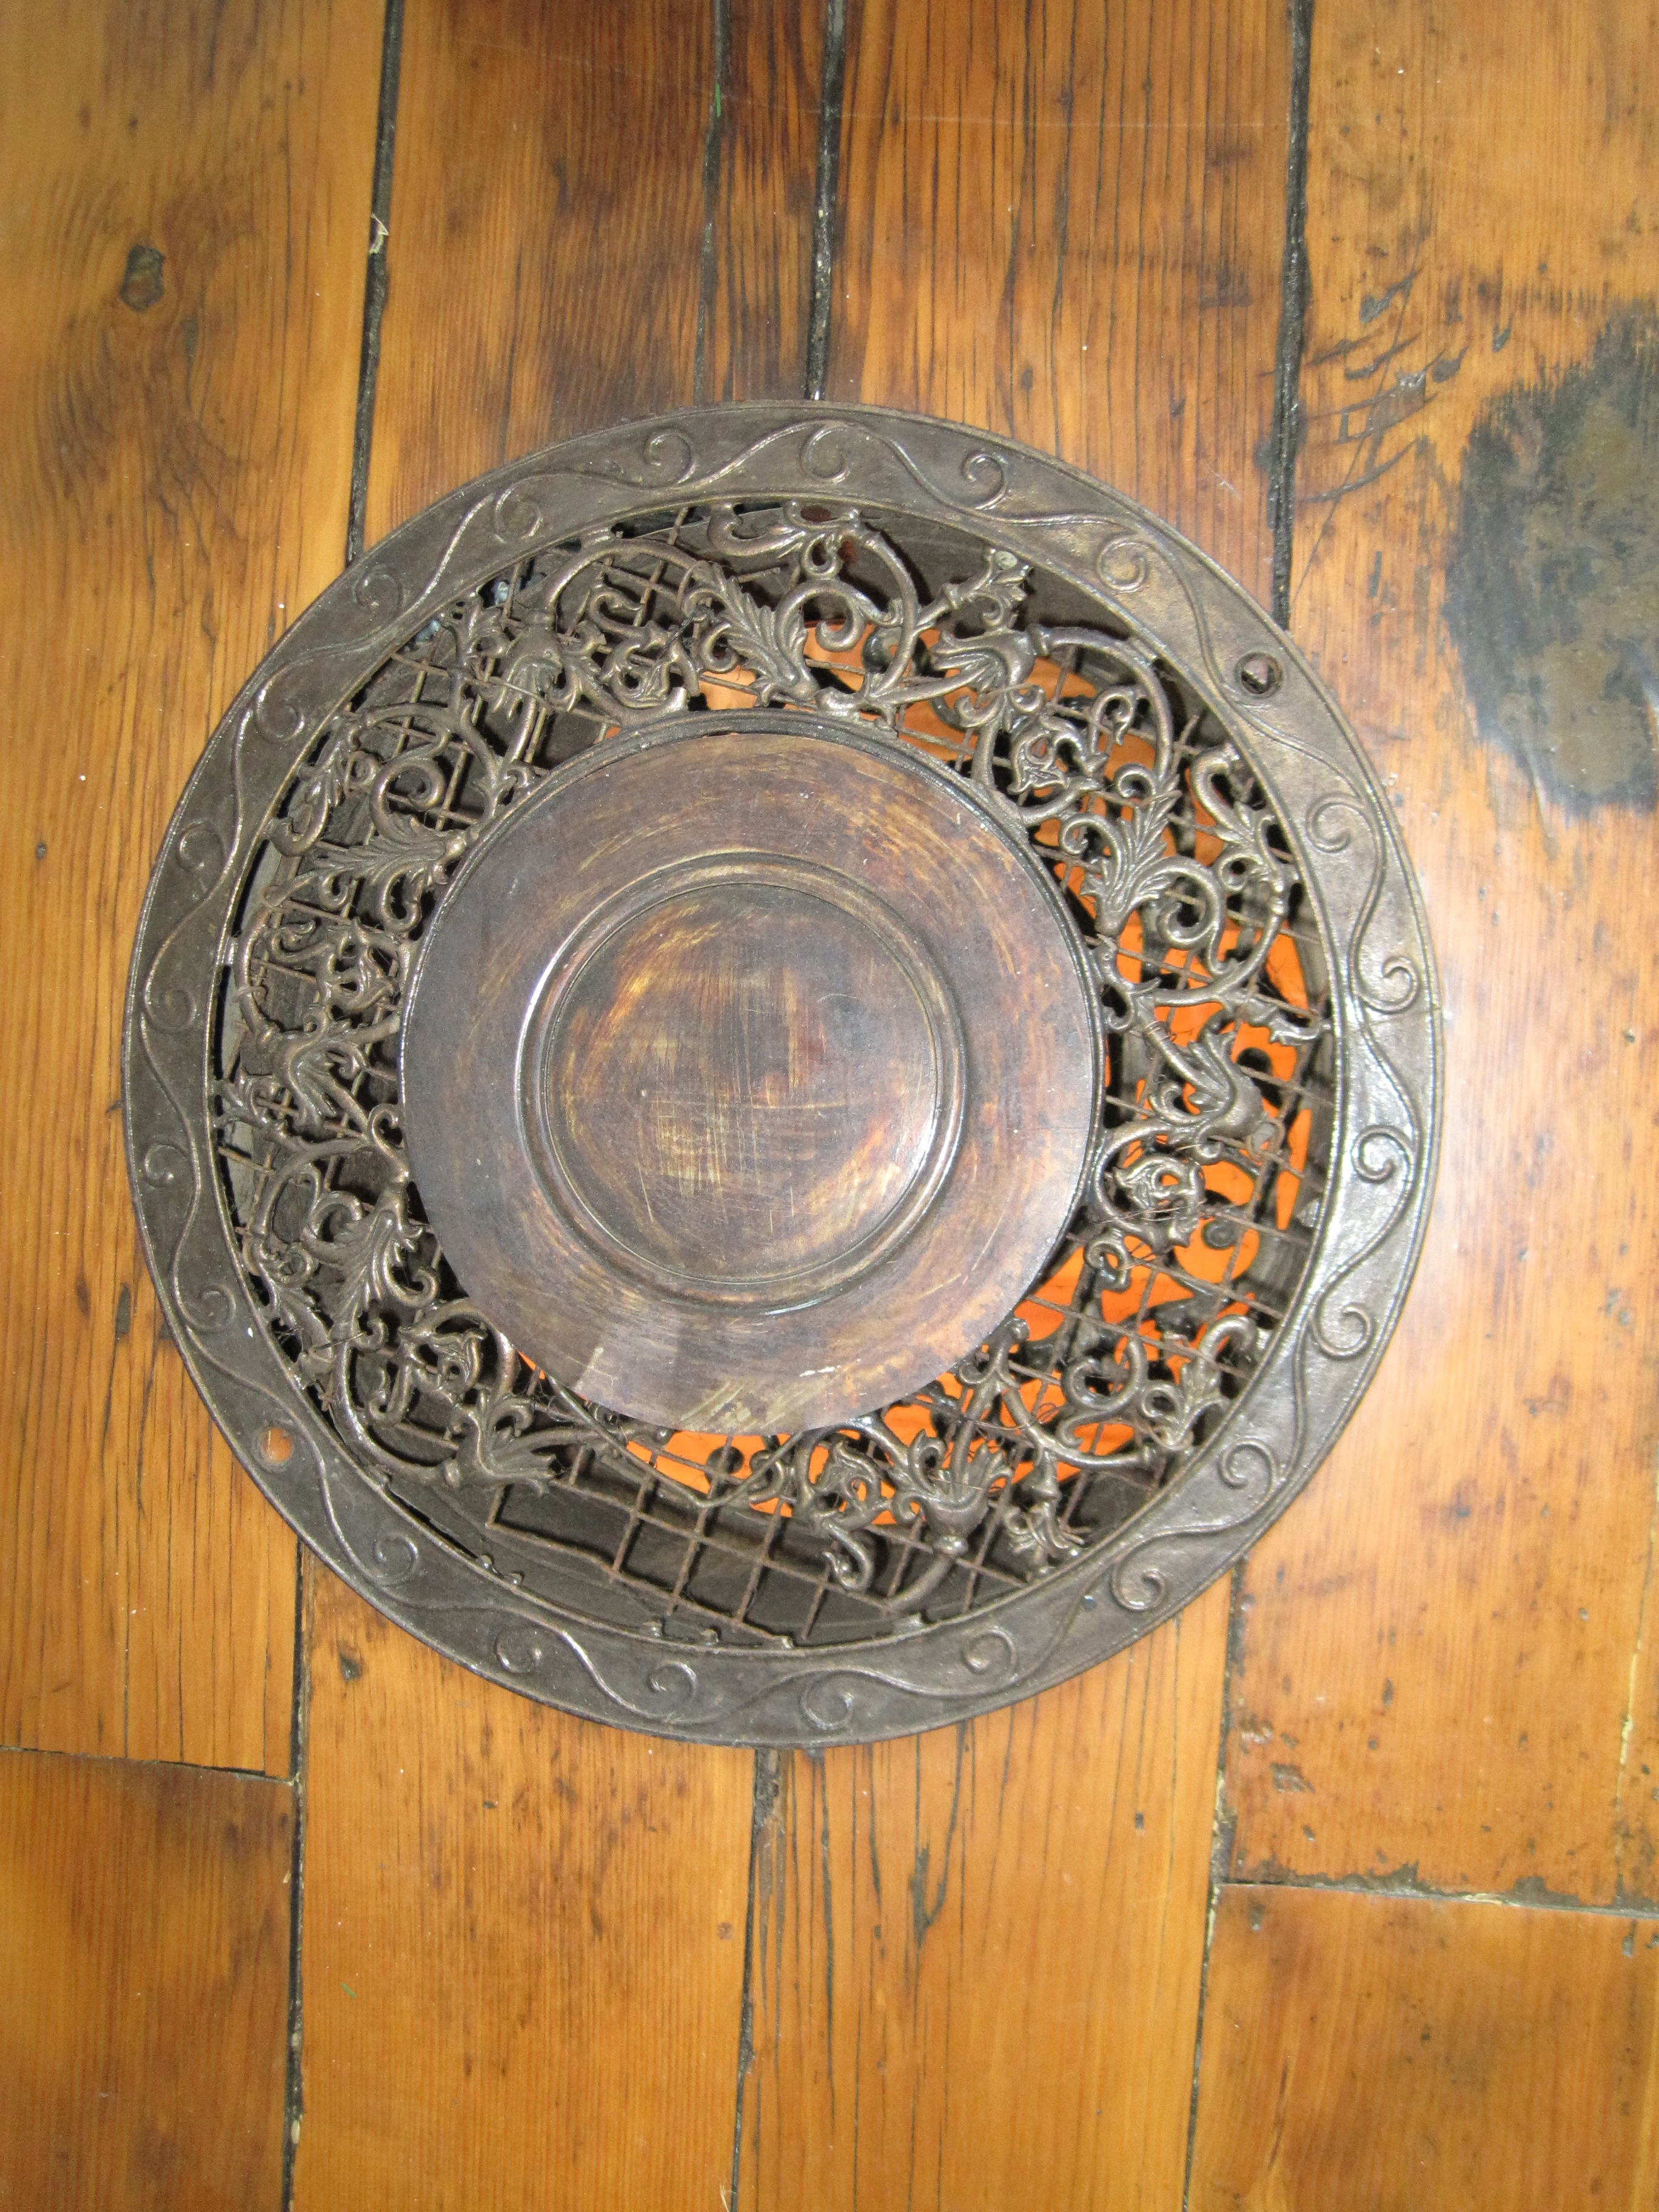 This decorative vent in the Hearth Room ceiling allowed heat from the fireplace oven to rise into the second floor children's bedroom